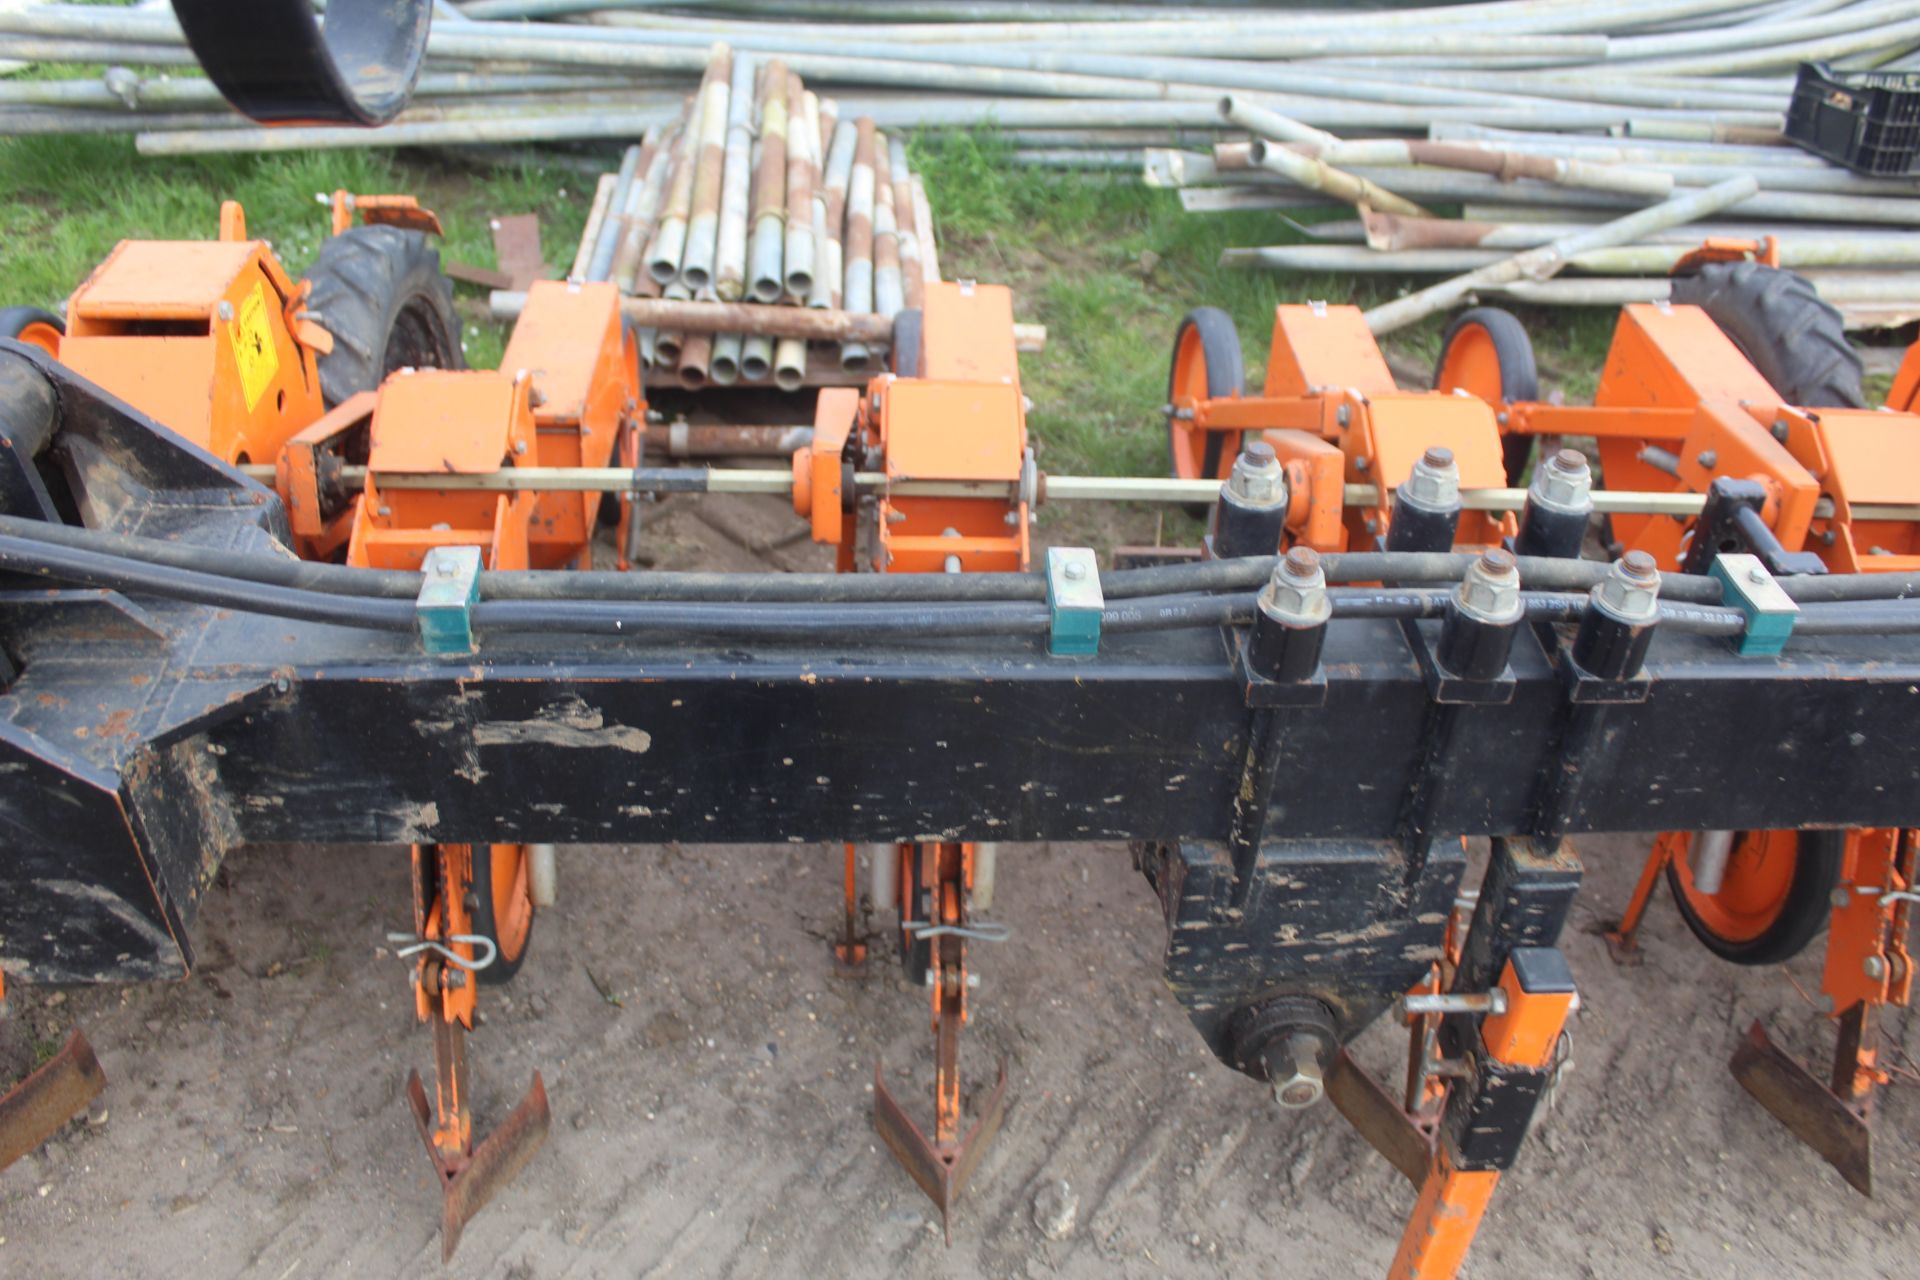 Stanhay Rallye 592 hdraulic folding 12 row beet drill. With bout markers. V - Bild 6 aus 28